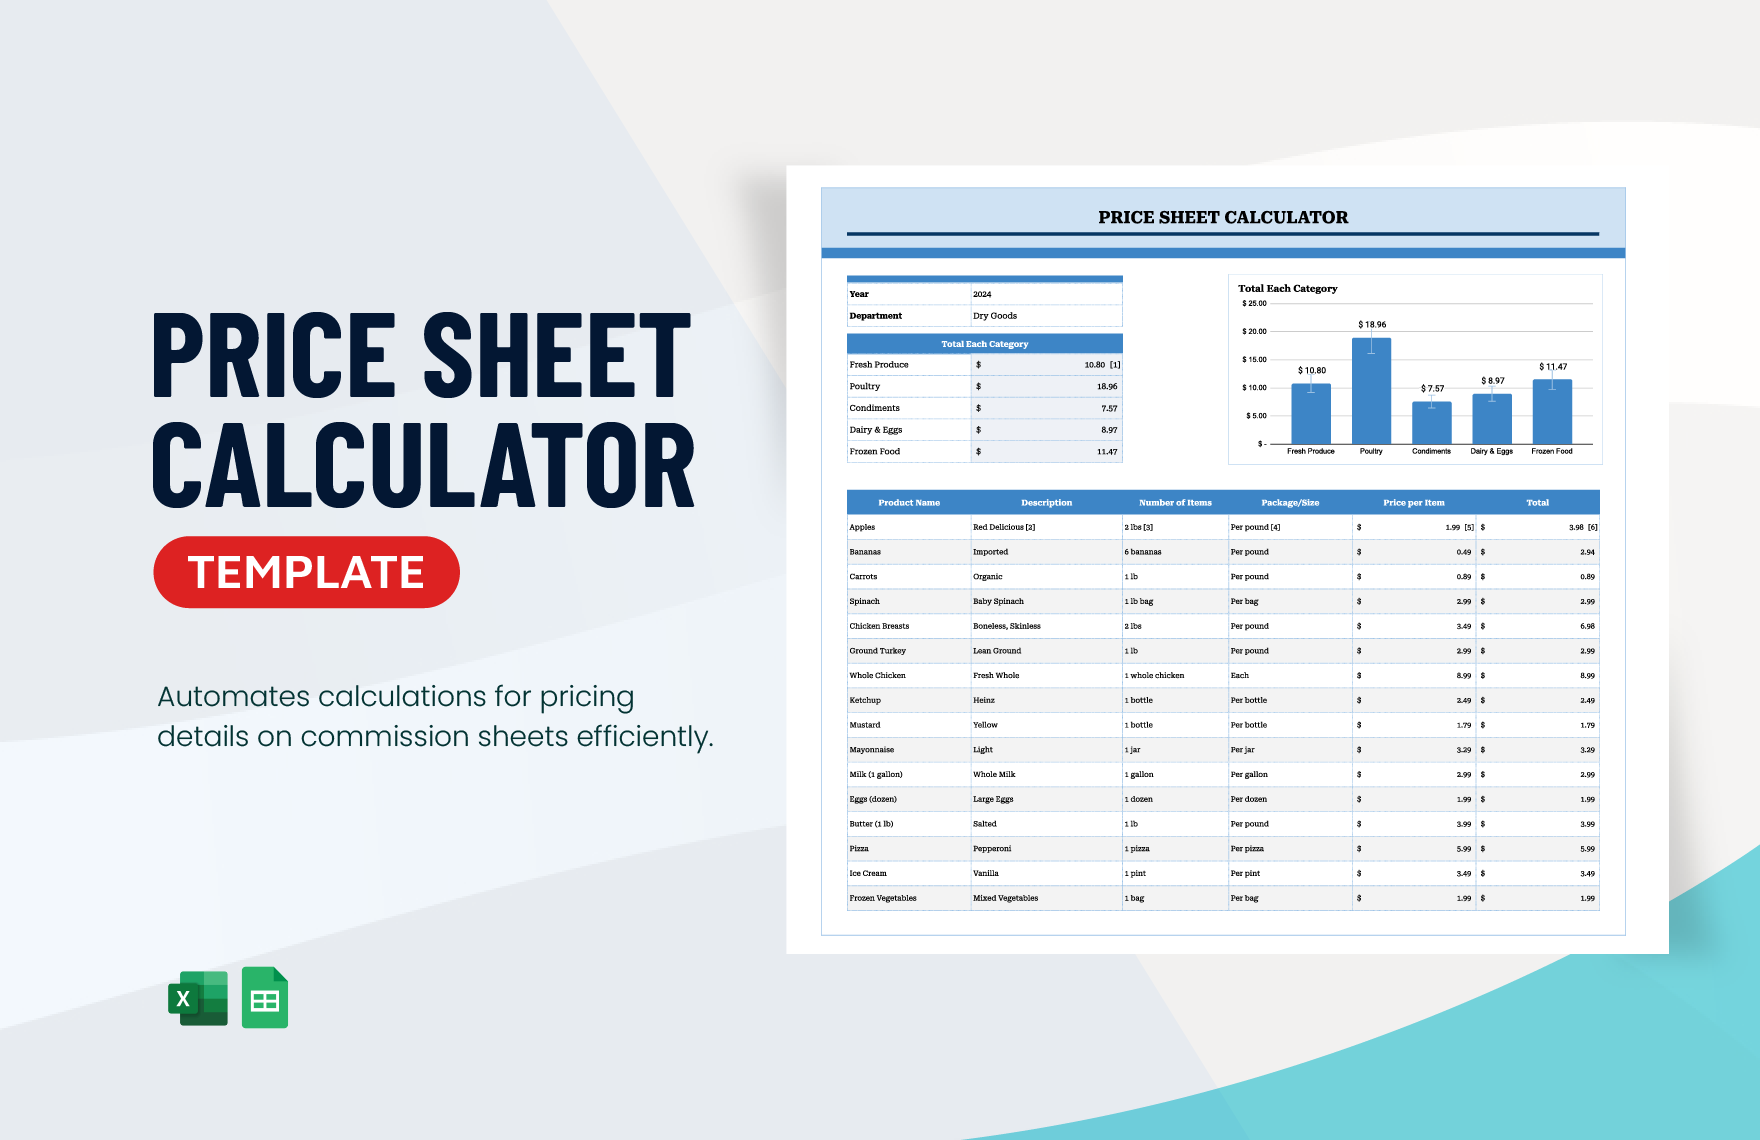 Price Sheet Calculator Template in Excel, Google Sheets